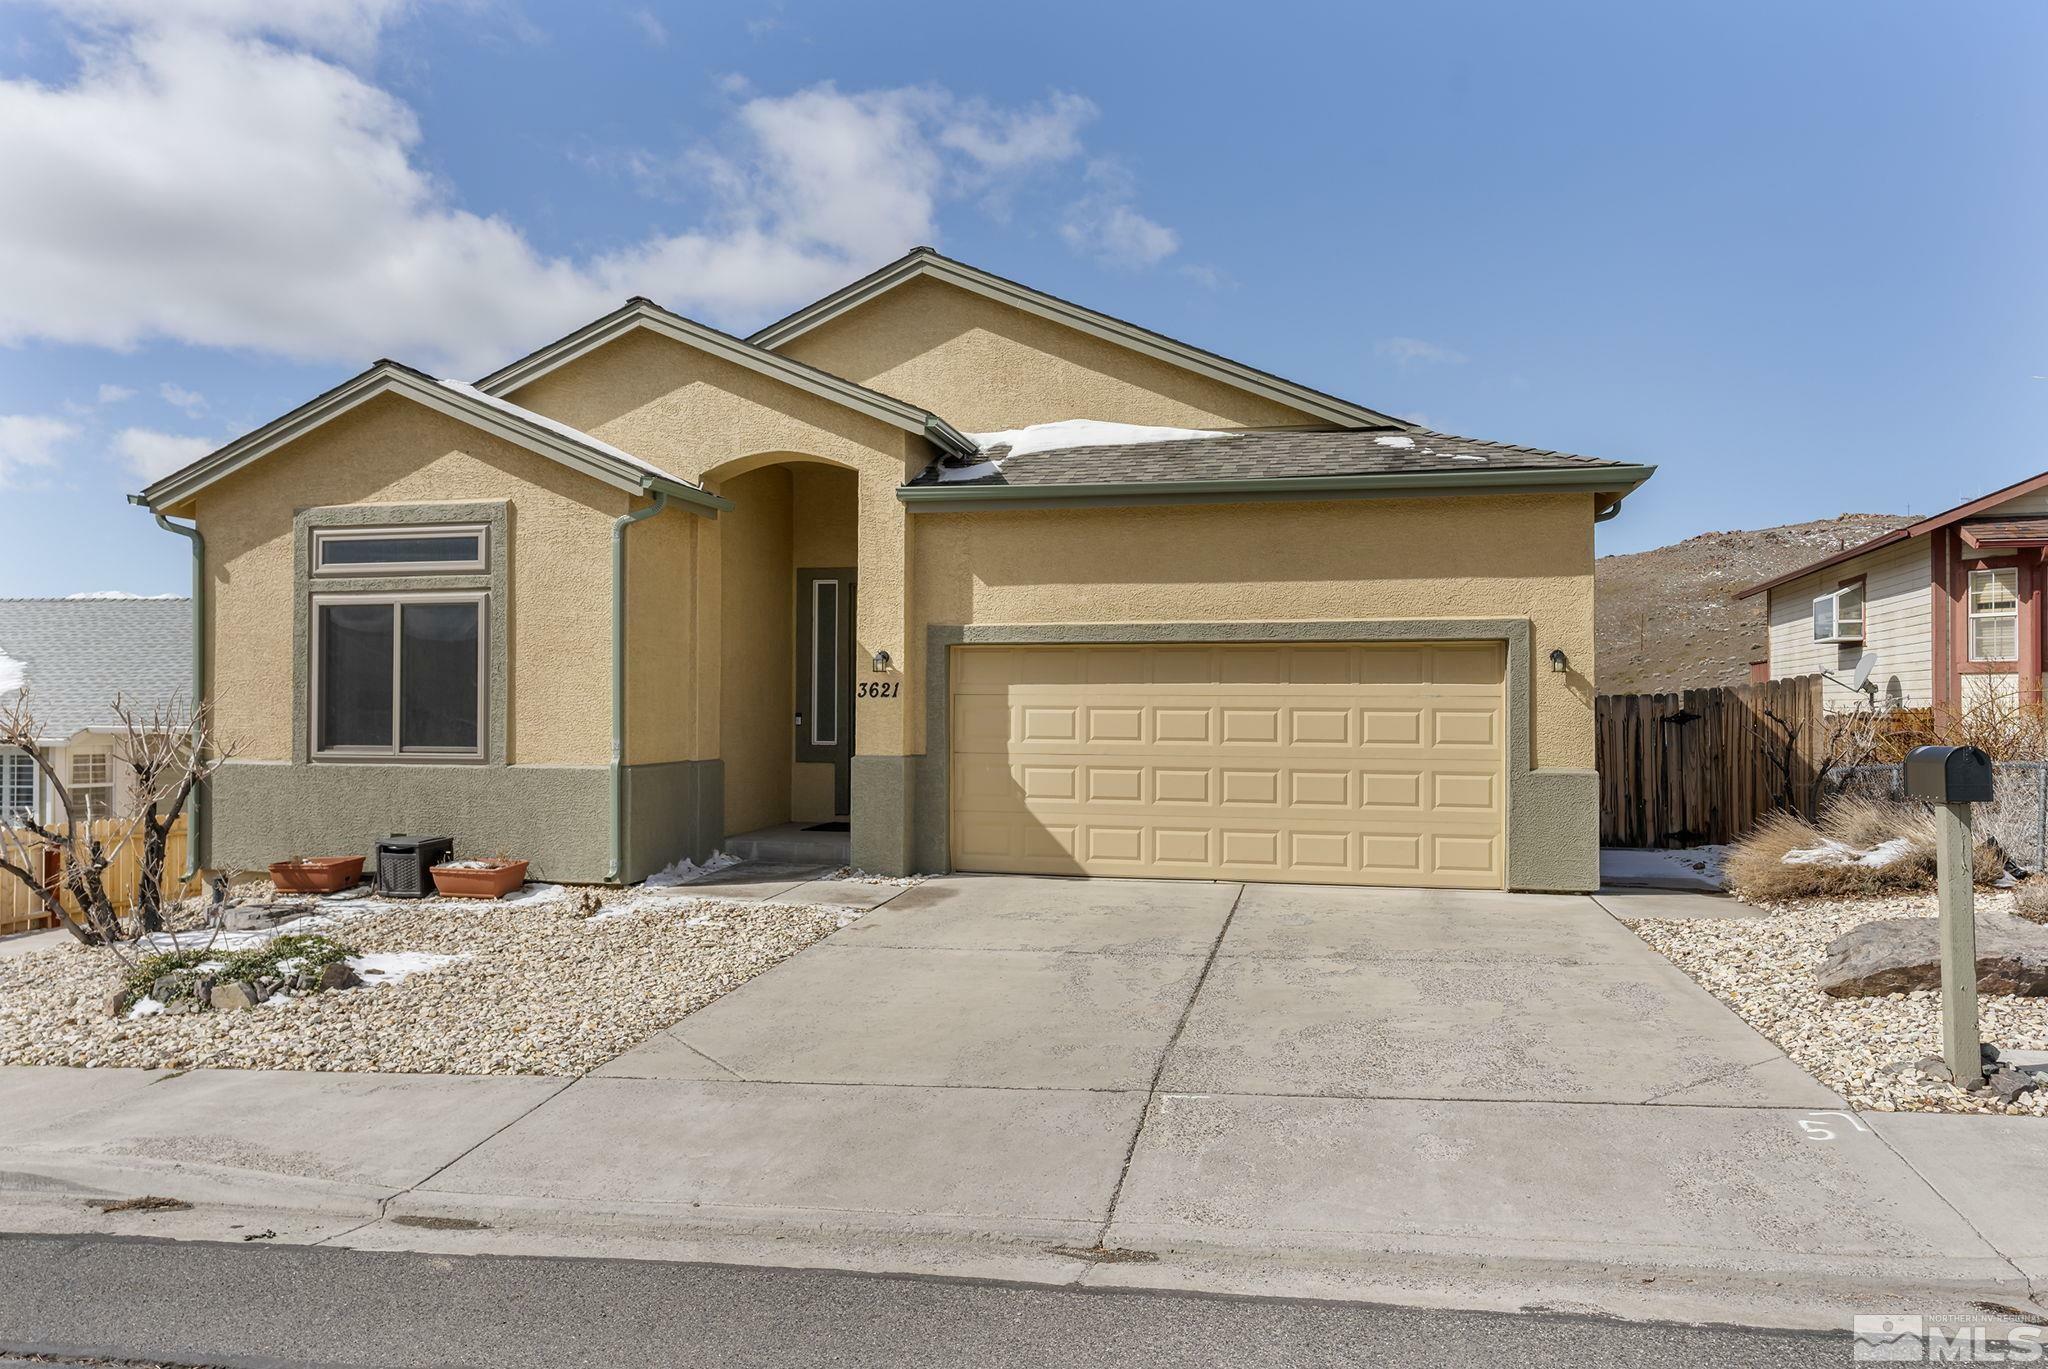 Property Photo:  3621 Cambrian Ct  NV 89503 